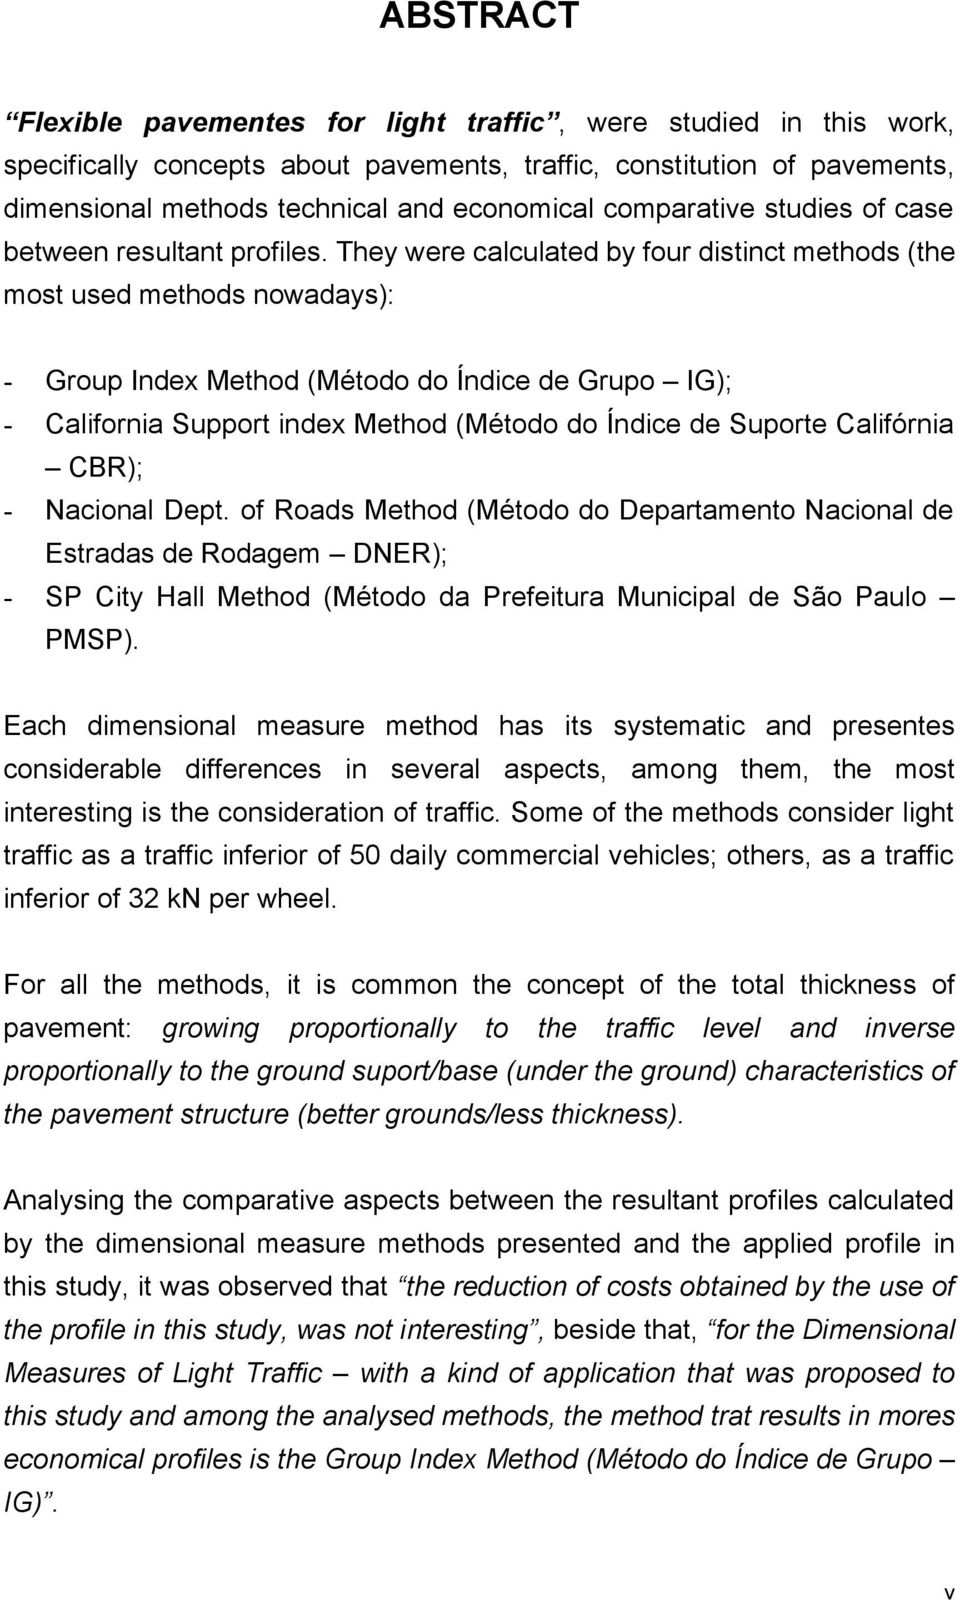 They were calculated by four distinct methods (the most used methods nowadays): - Group Index Method (Método do Índice de Grupo IG); - California Support index Method (Método do Índice de Suporte